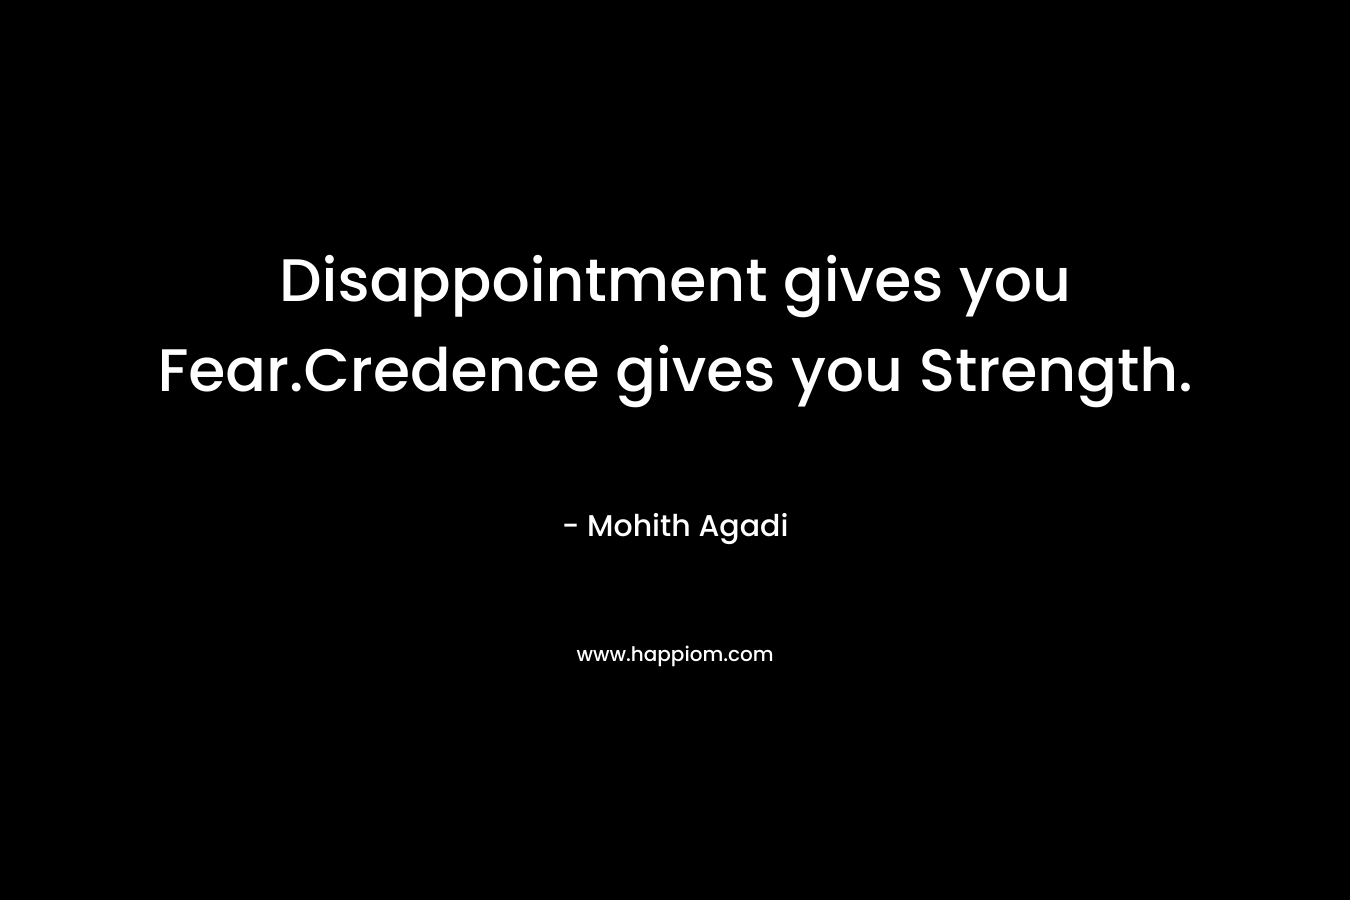 Disappointment gives you Fear.Credence gives you Strength.